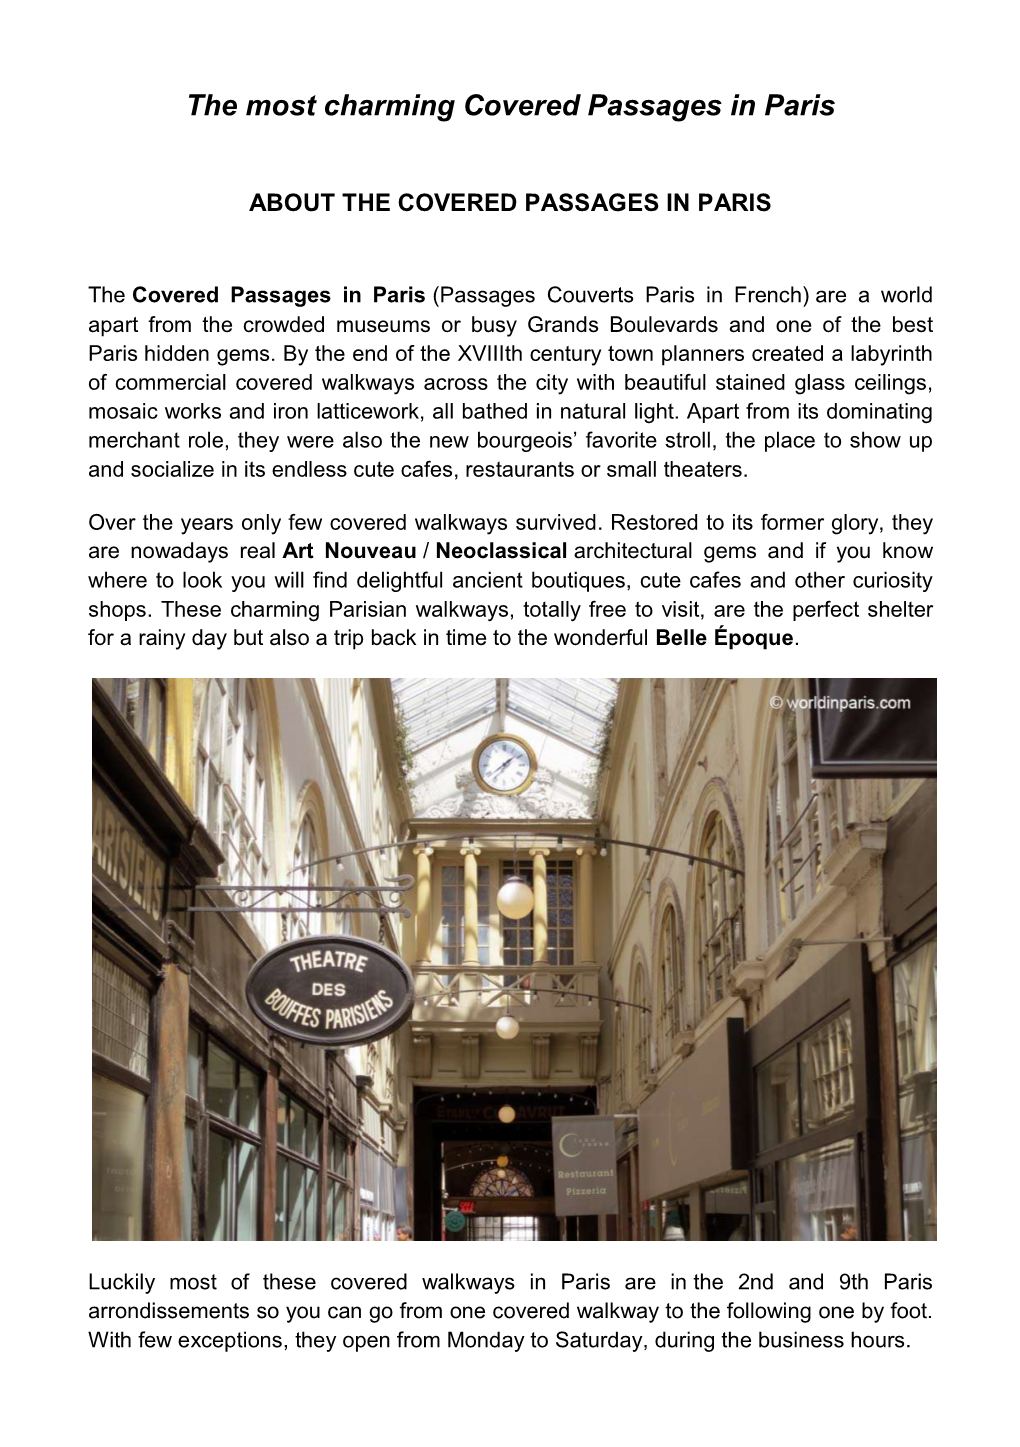 The Most Charming Covered Passages in Paris